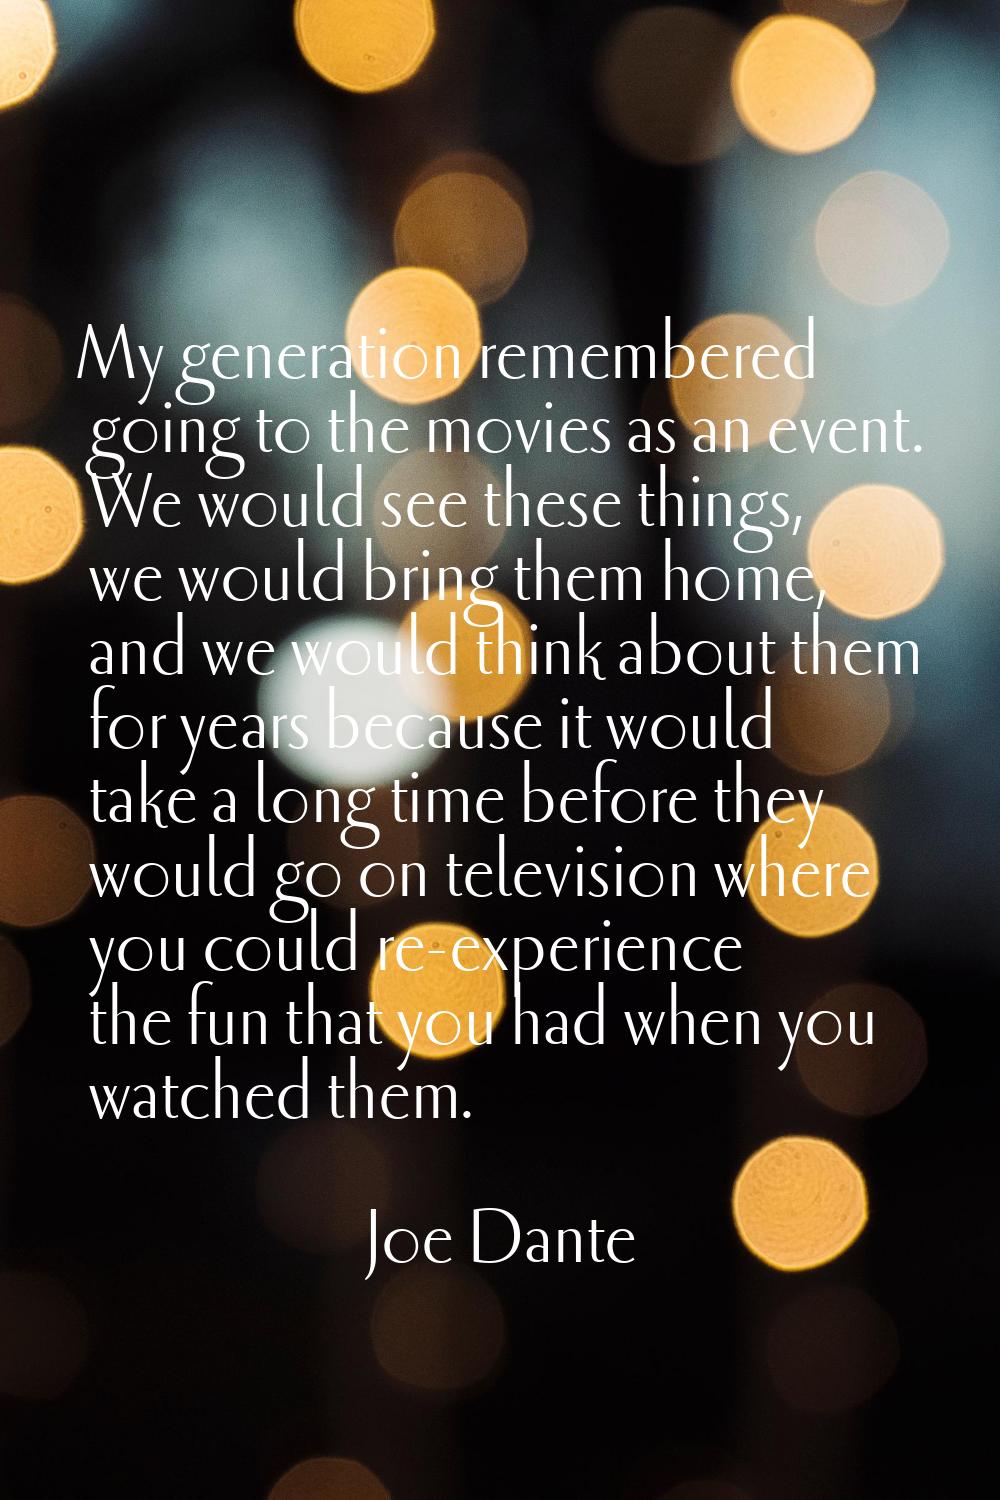 My generation remembered going to the movies as an event. We would see these things, we would bring